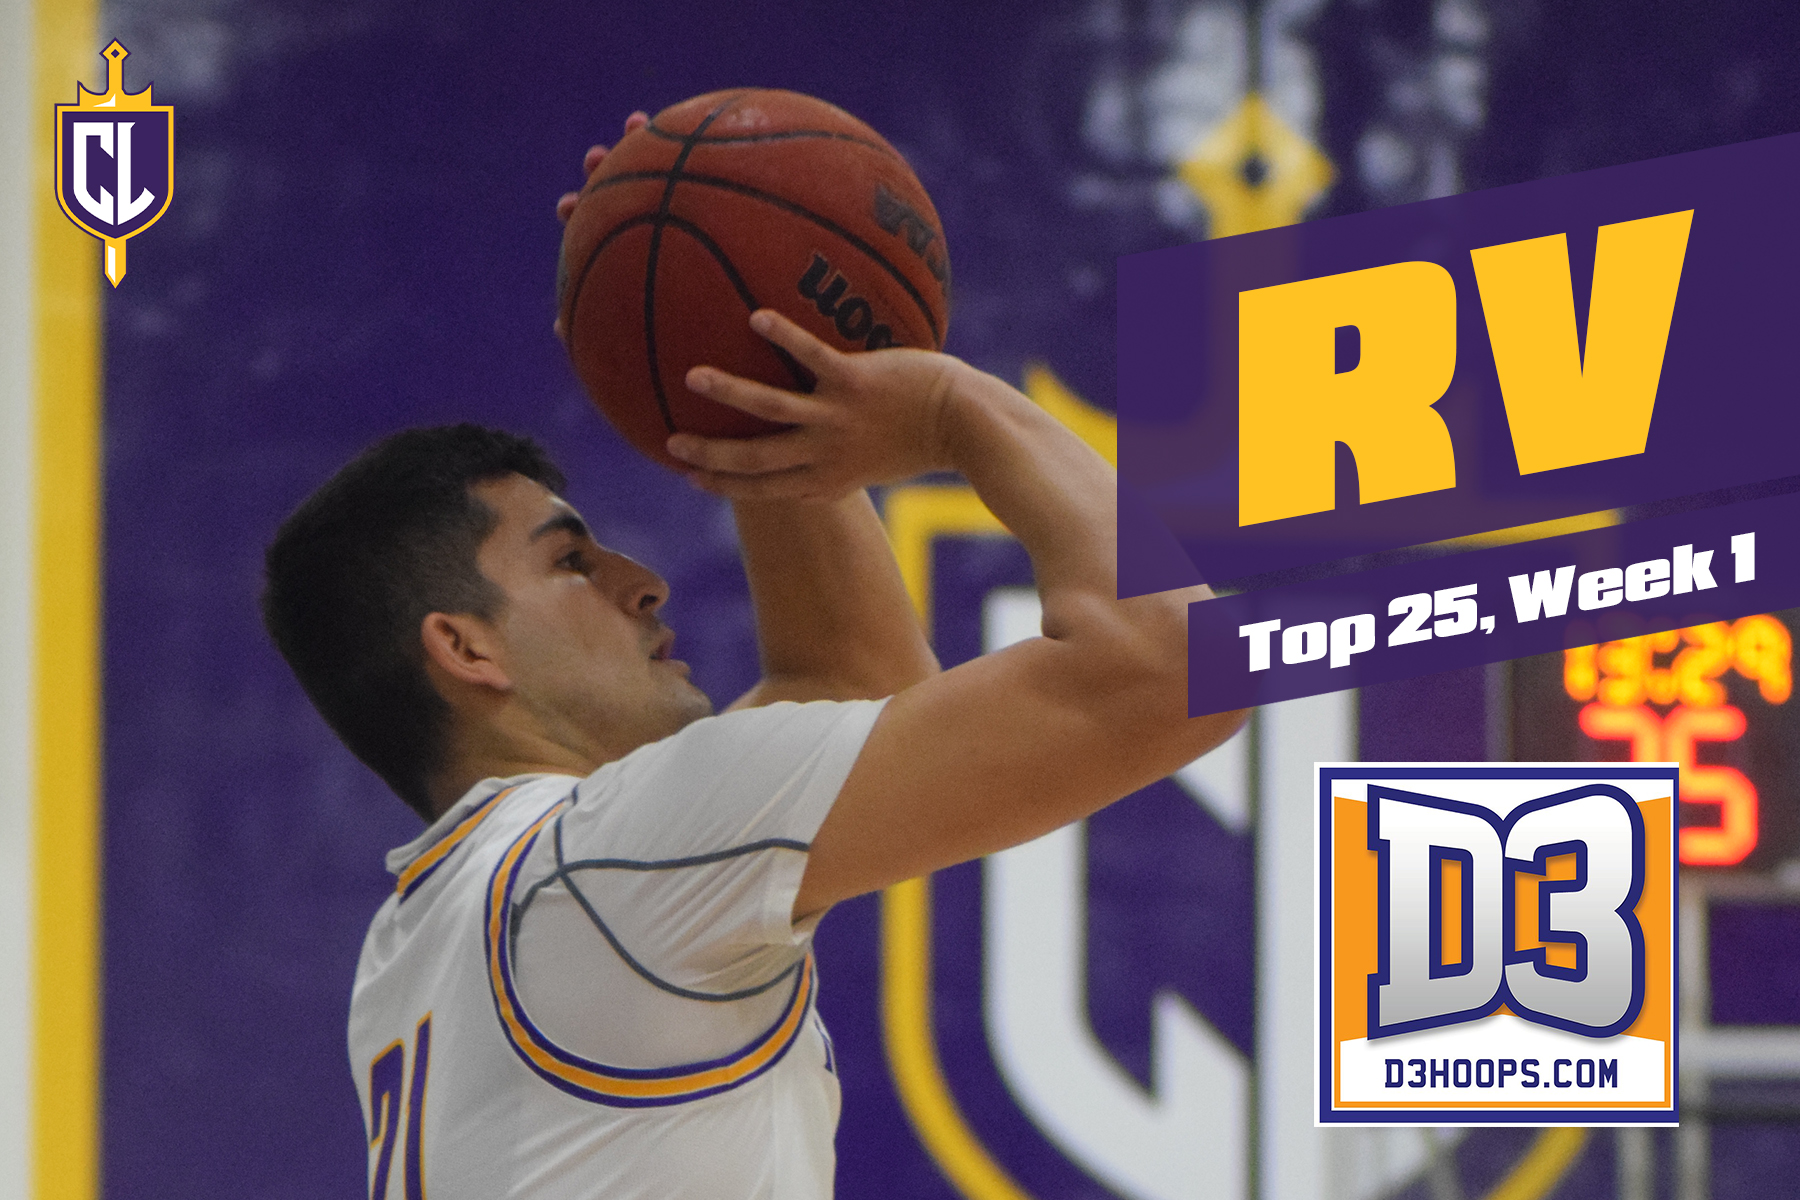 Kingsmen Receiving Votes in First D3hoops.com Poll